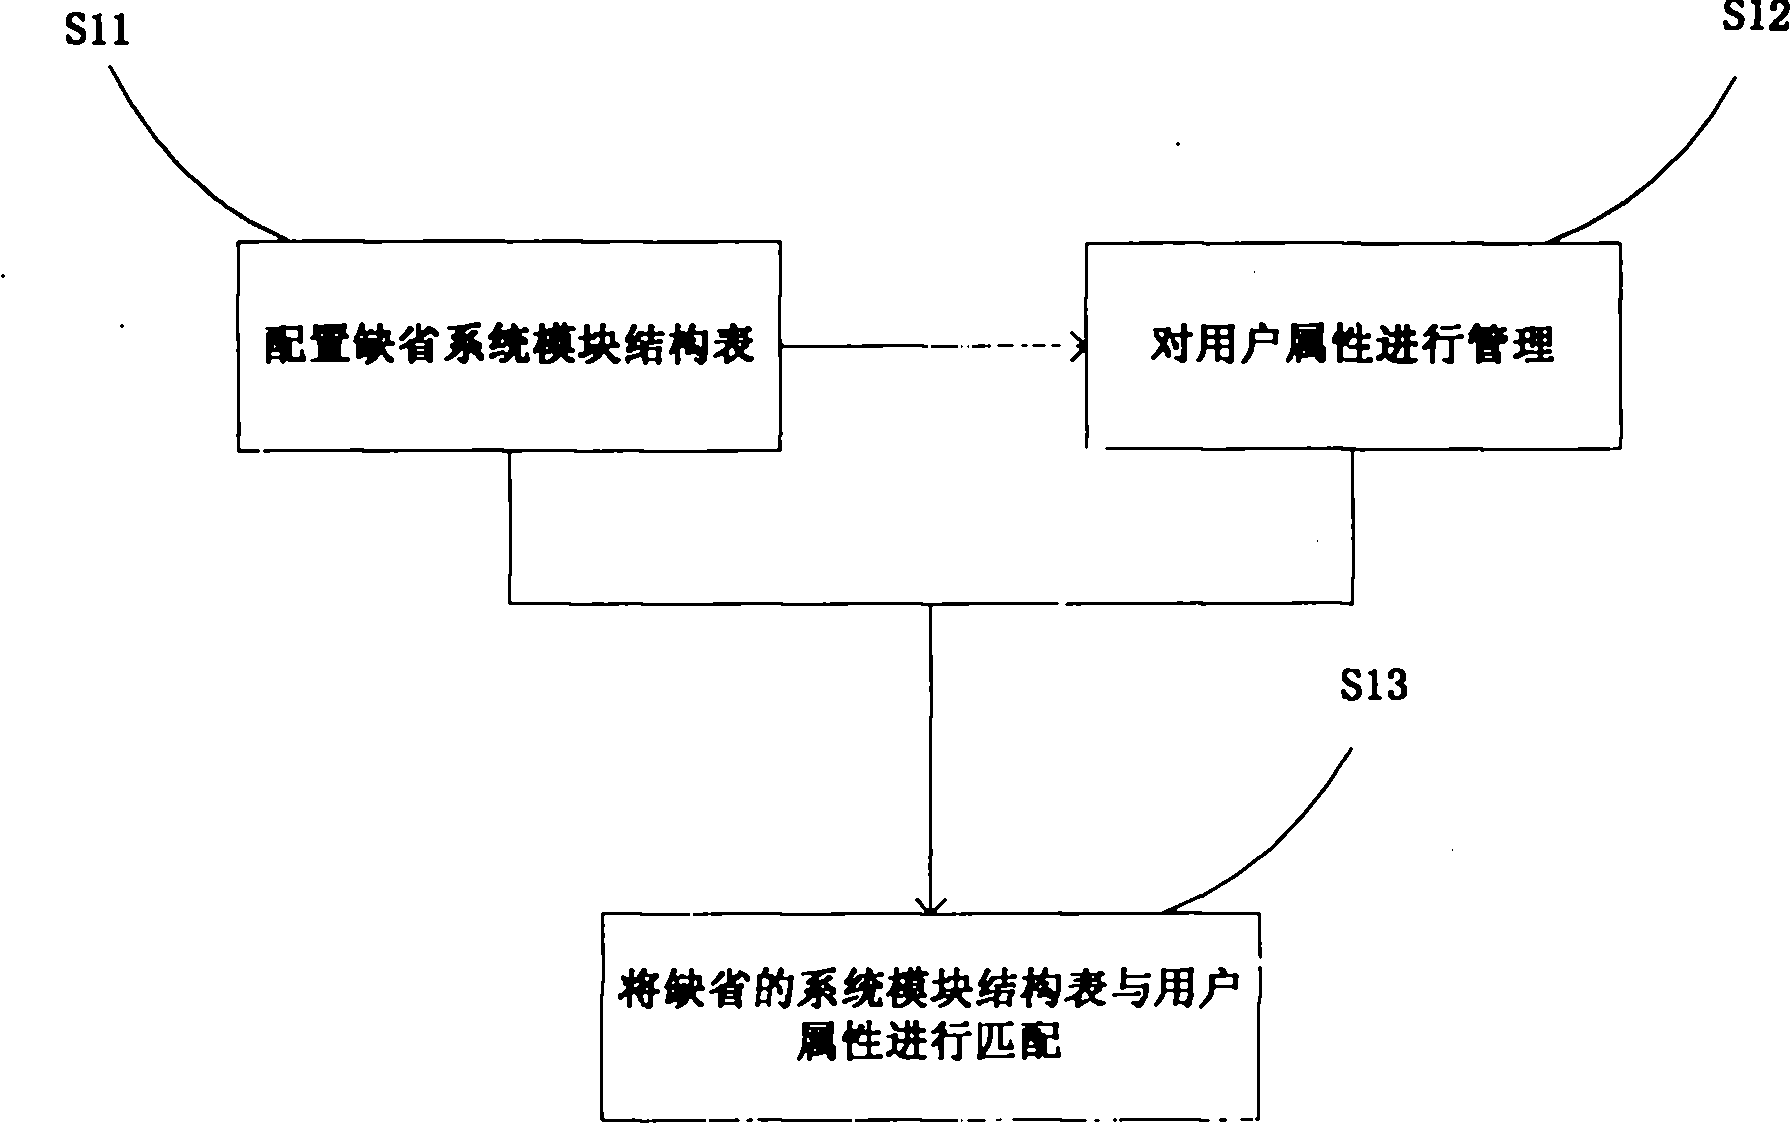 Default right configuration method and default right configuration unit